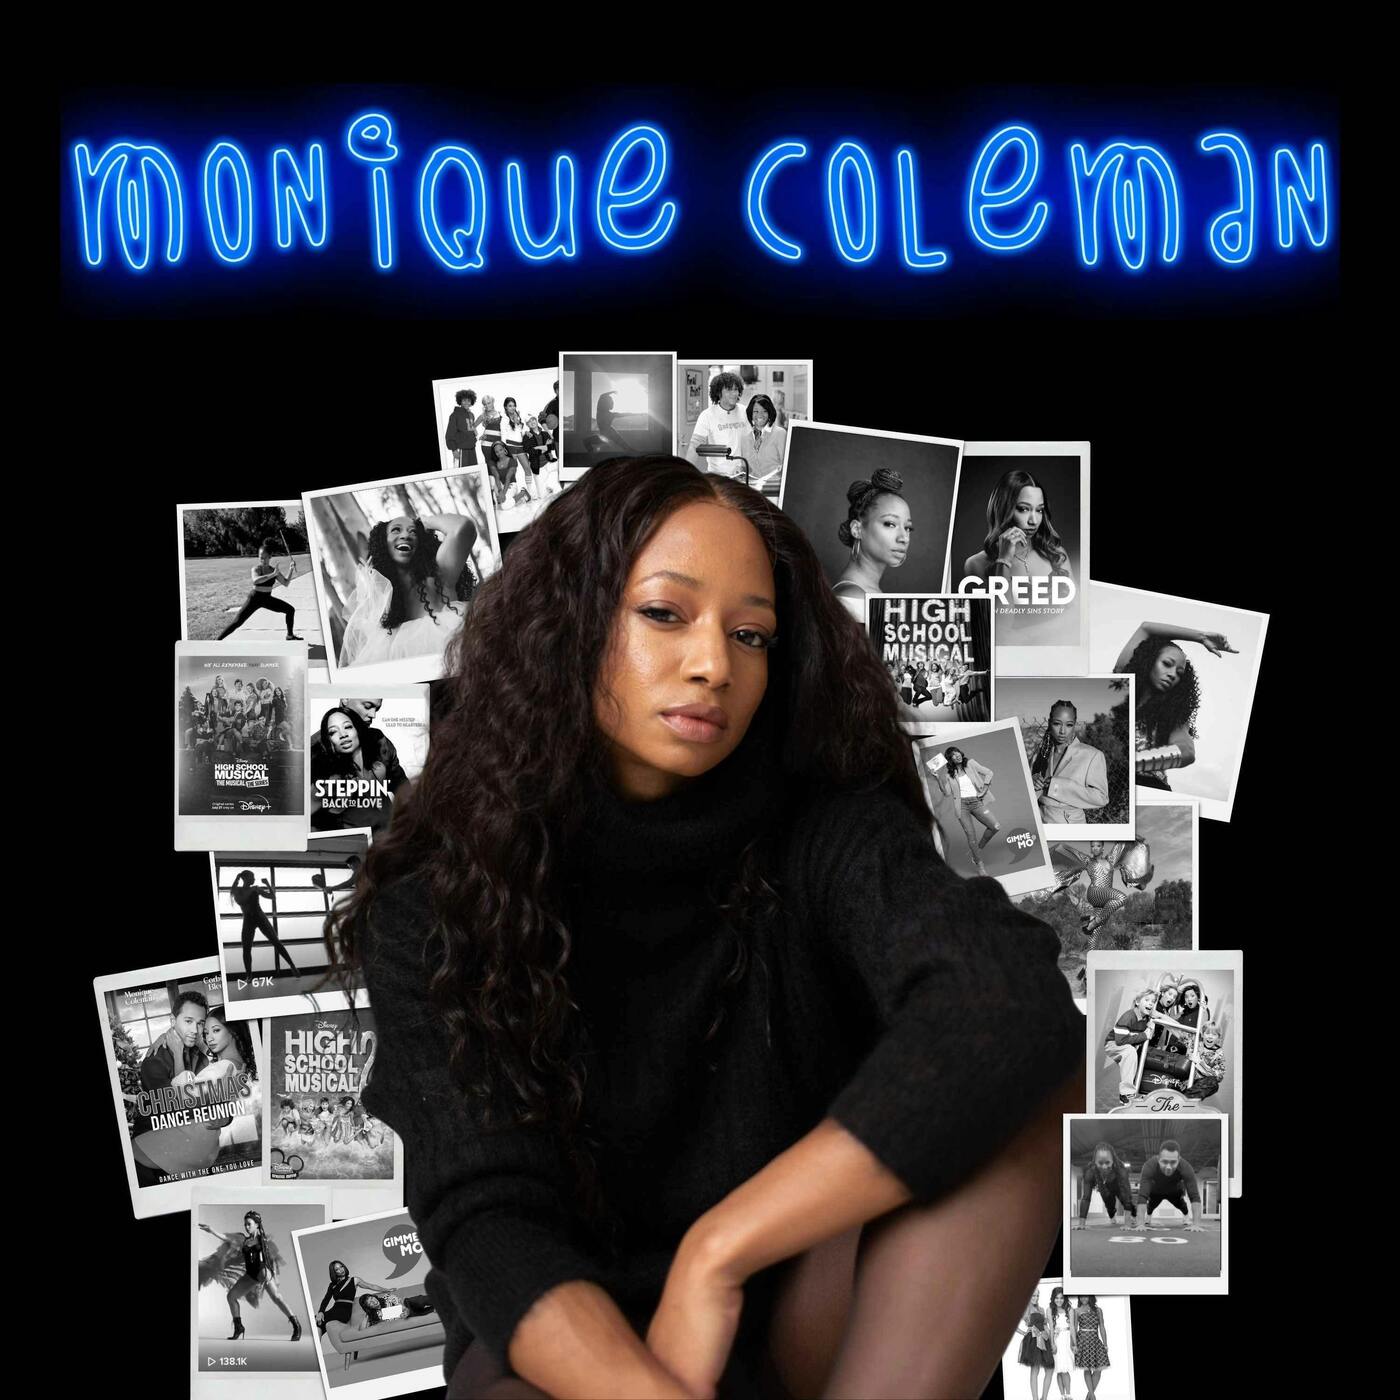 Vulnerable EP39: High School Musical Actress Monique Coleman on Disney, Returning to East High, & Becoming #MightyMo